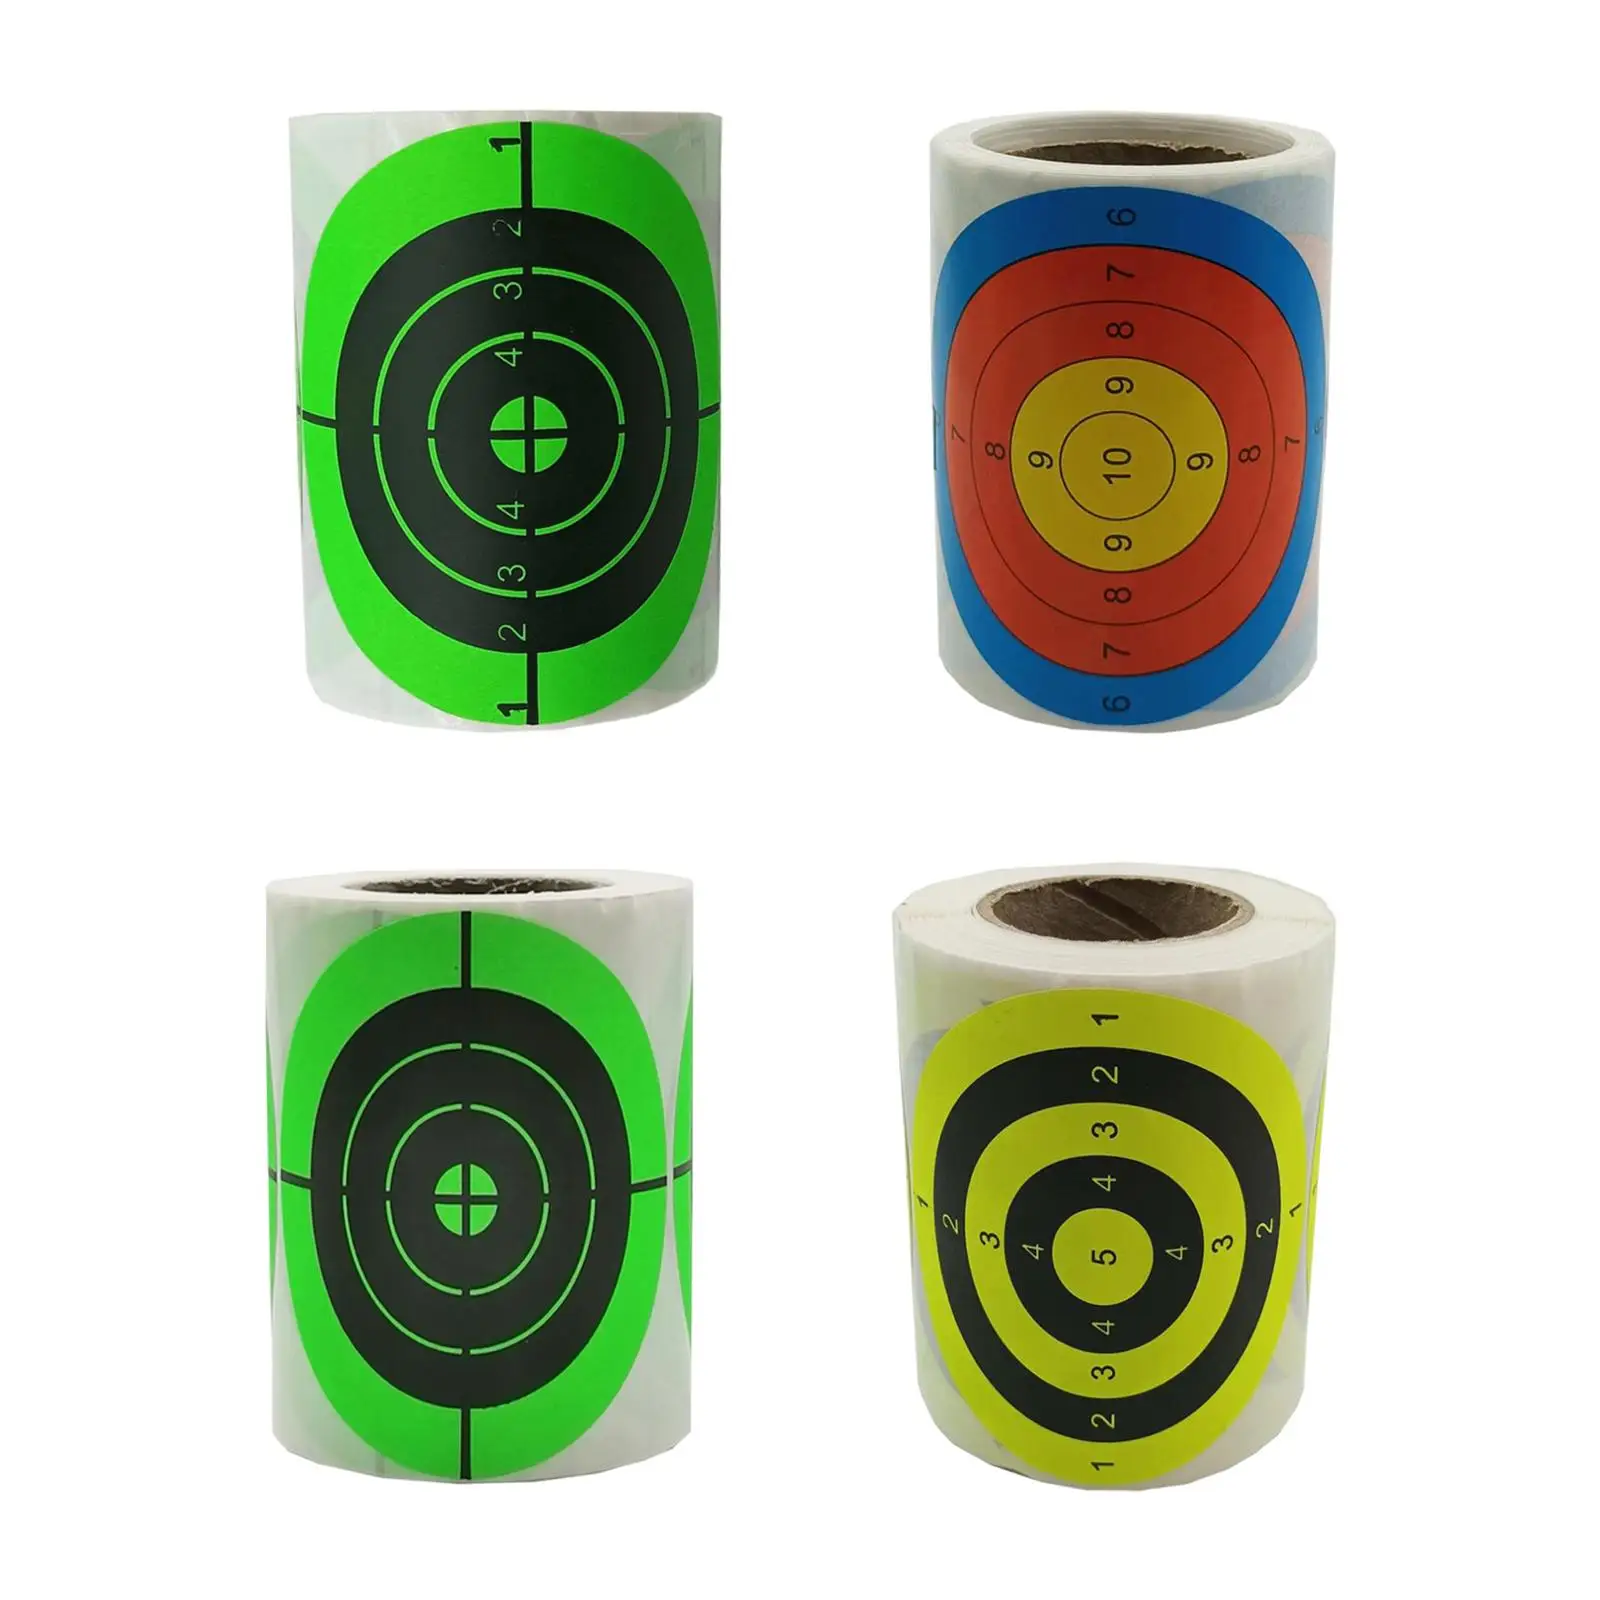 200Pcs Per Roll Durable Splatter Shooting Target Stickers 3inch Splash Target Sticker for Archery Hunting Shooting Accessories